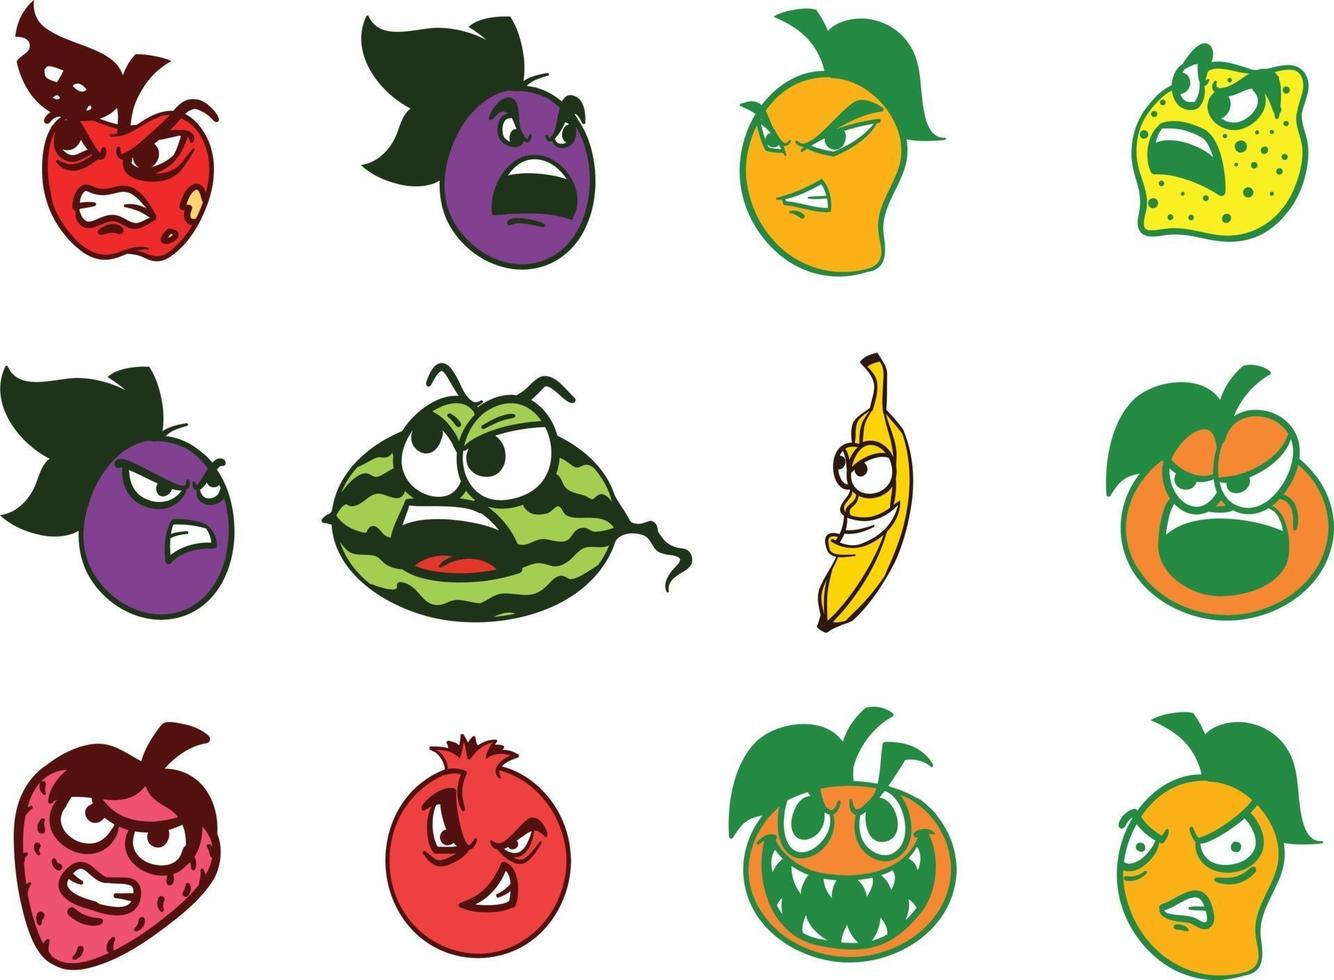 Evil Angry Fruits and Vegetables for Spooky Scary Halloween Stickers vector